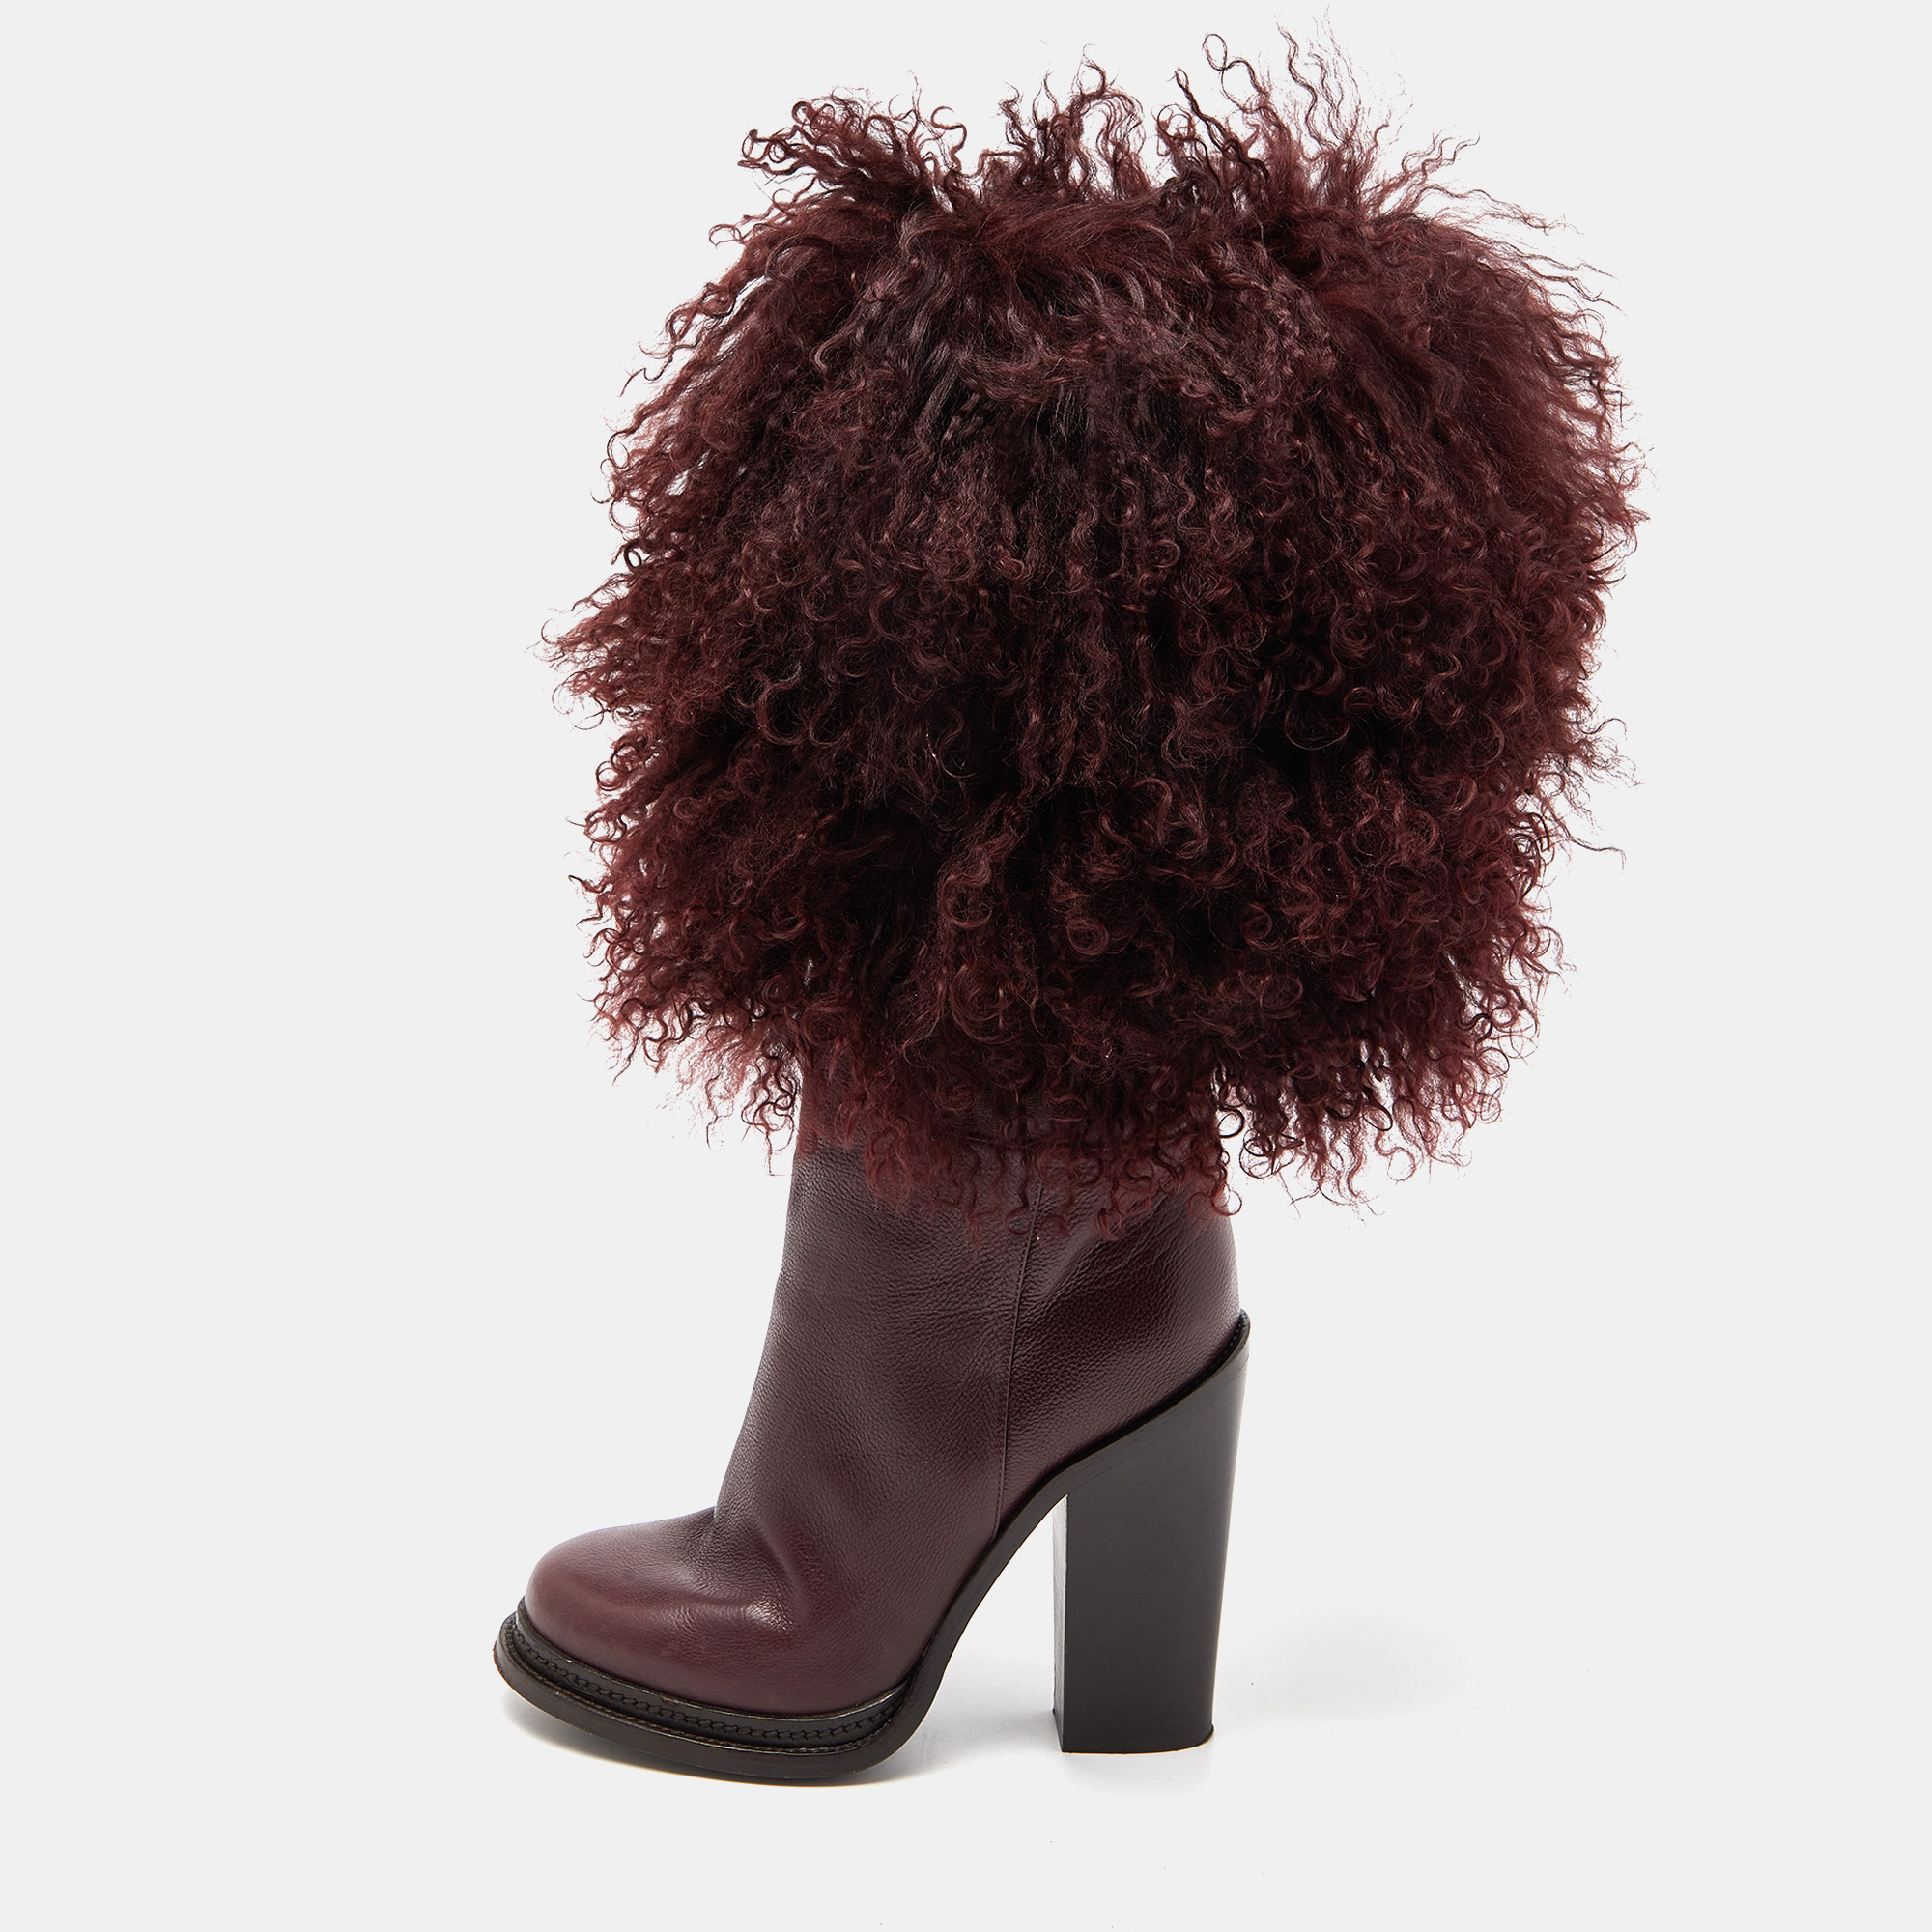 Dolce & Gabbana Burgundy Fur And Leather Calf Length Boots Size 38